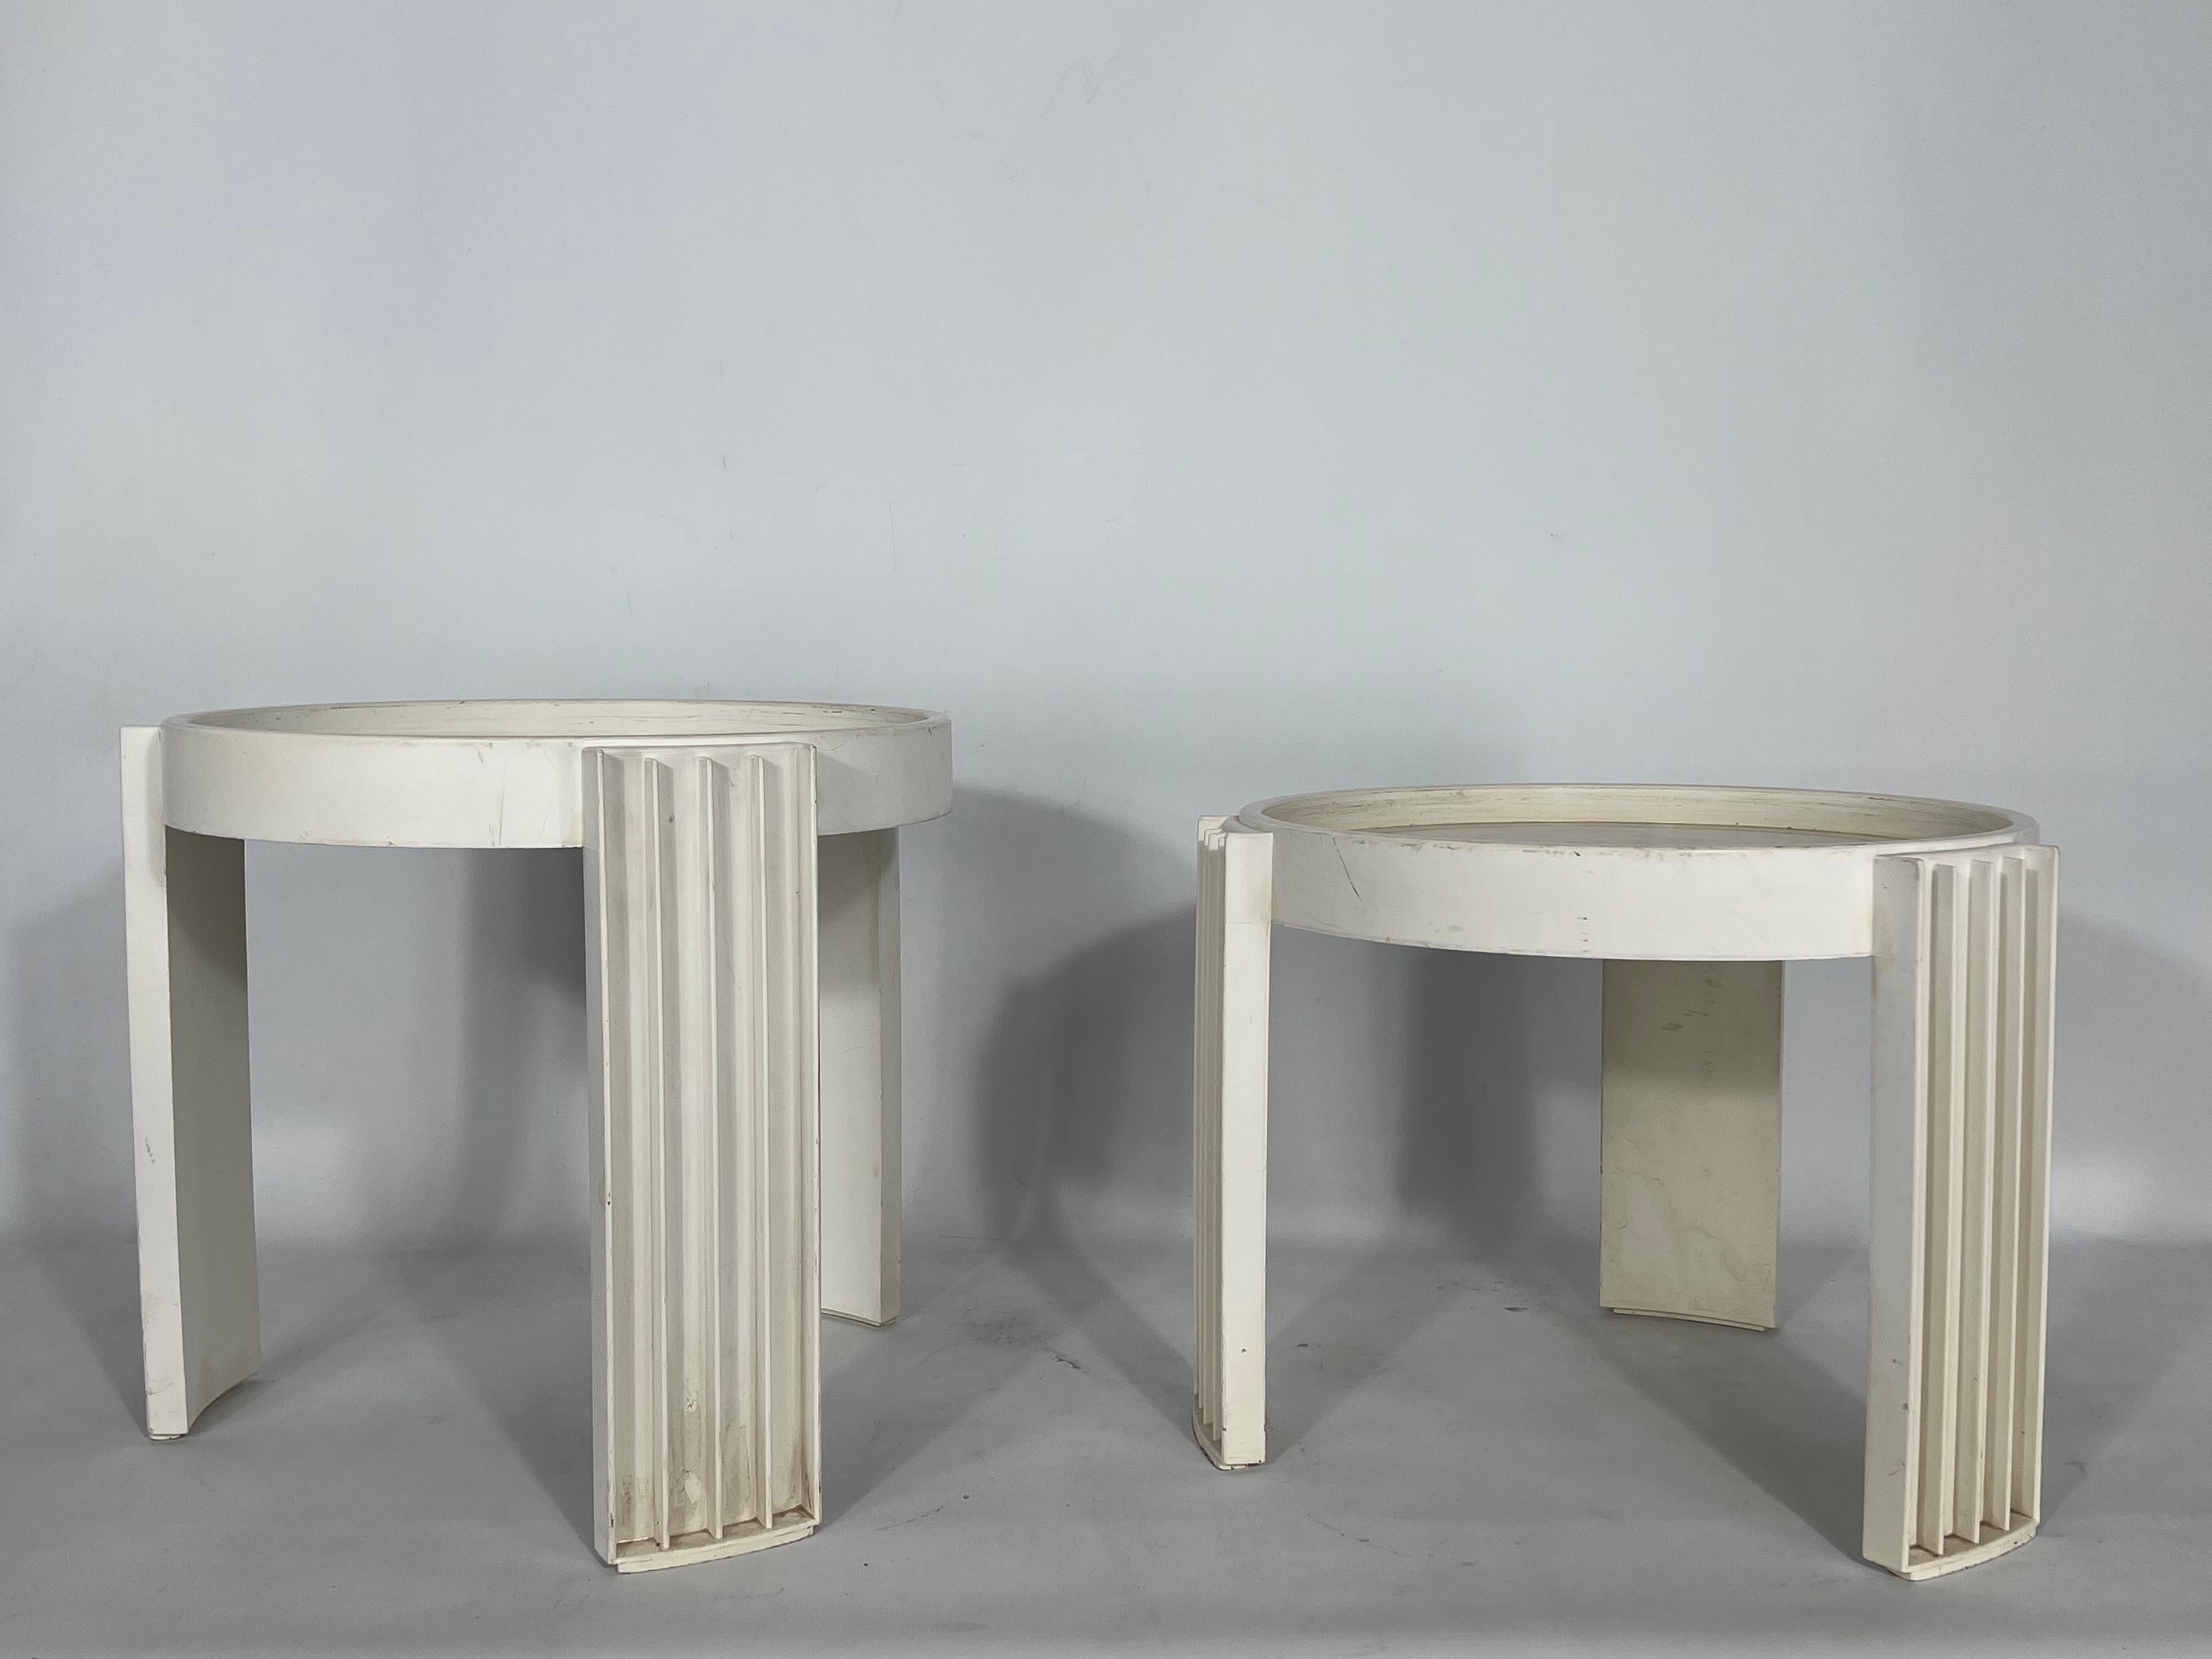 Fair condition with evident trace of age and use for this set of two plastic nesting table model Marema, designed by Gianfranco Frattini and produced by Cassina during the 60s.